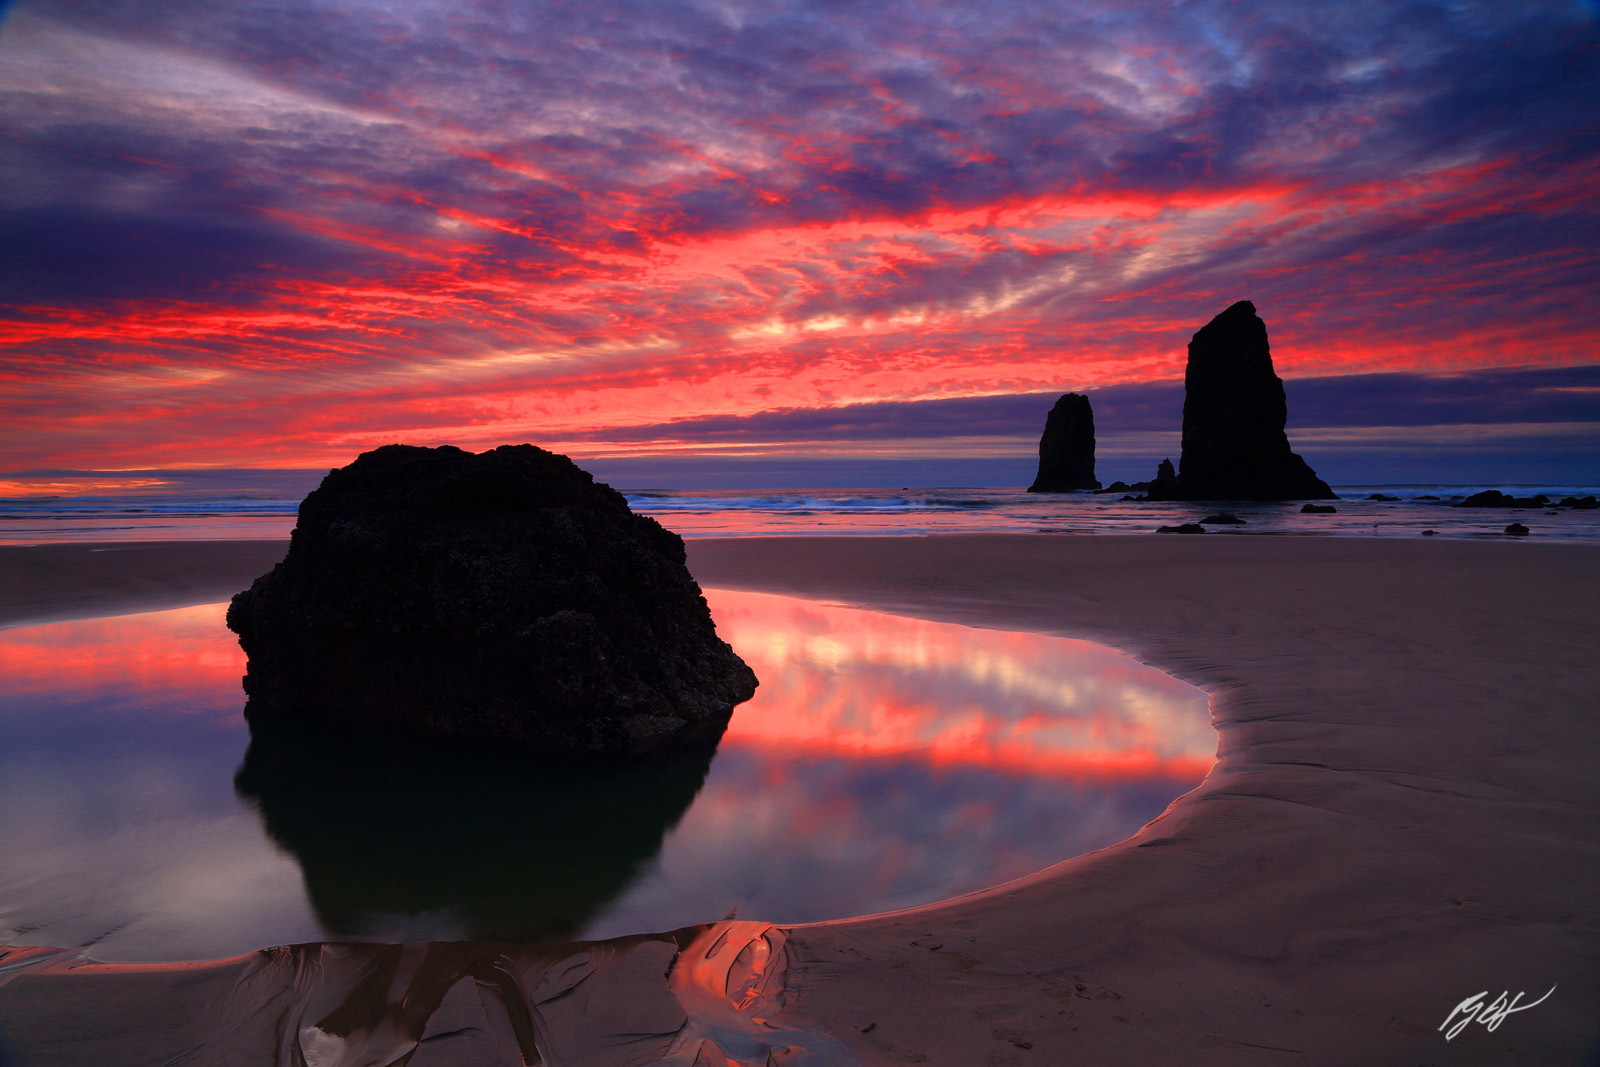 Sunset and the Needles Rock Formations from Cannon Beach in Oregon